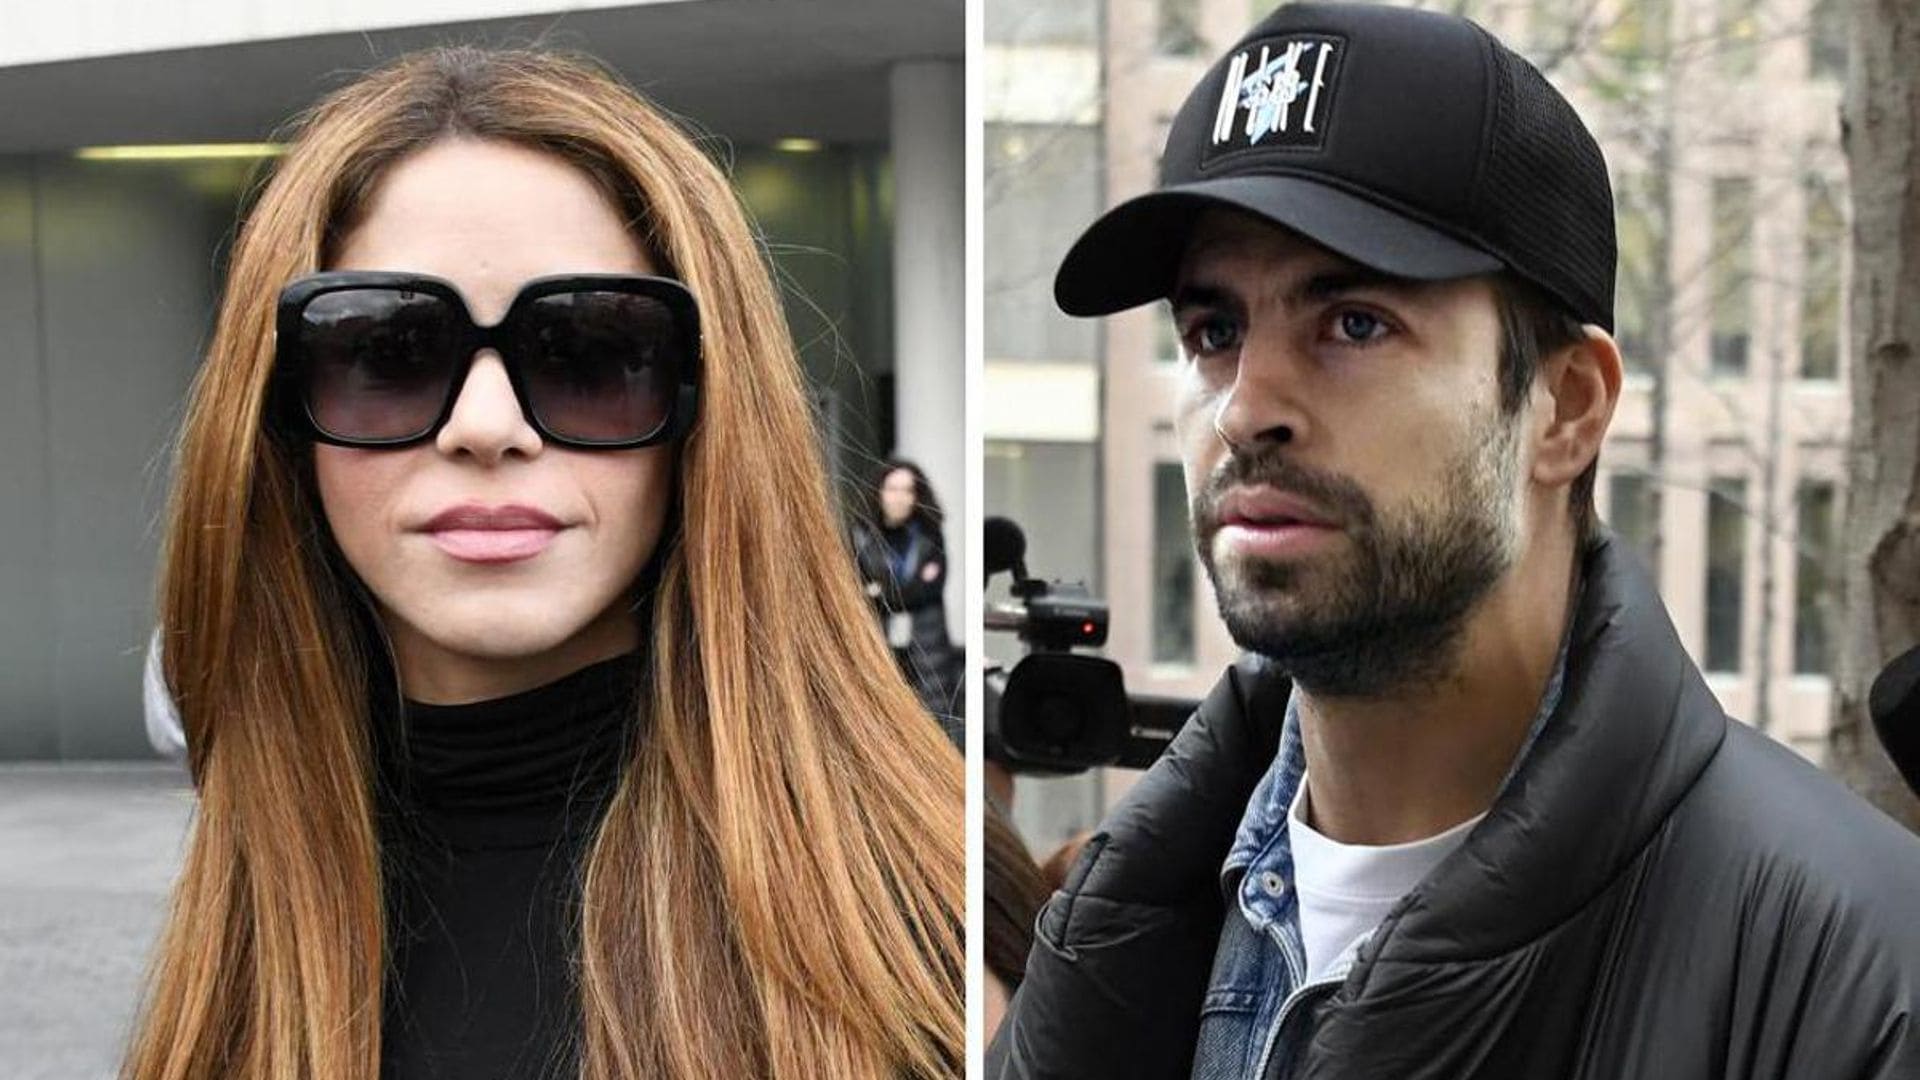 Gerard Pique and Shakira arrive at court in Barcelona over custody of their children